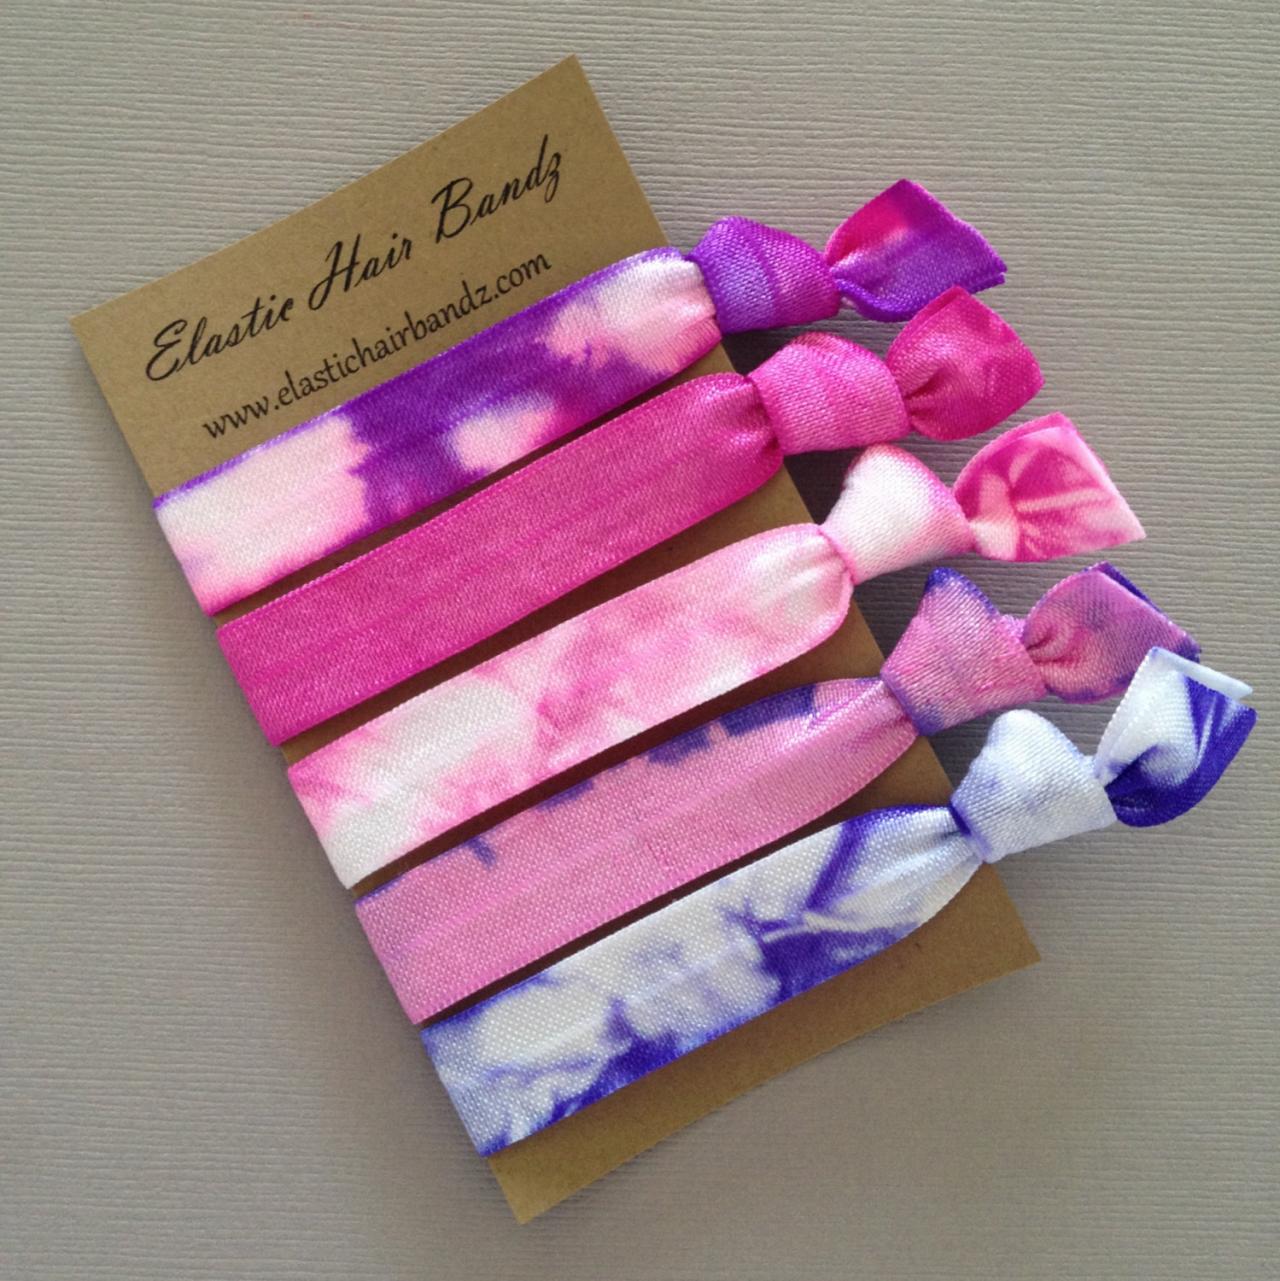 The Molly Hair Tie - Ponytail Holder Collection - 5 Elastic Hair Ties By Elastic Hair Bandz On Etsy